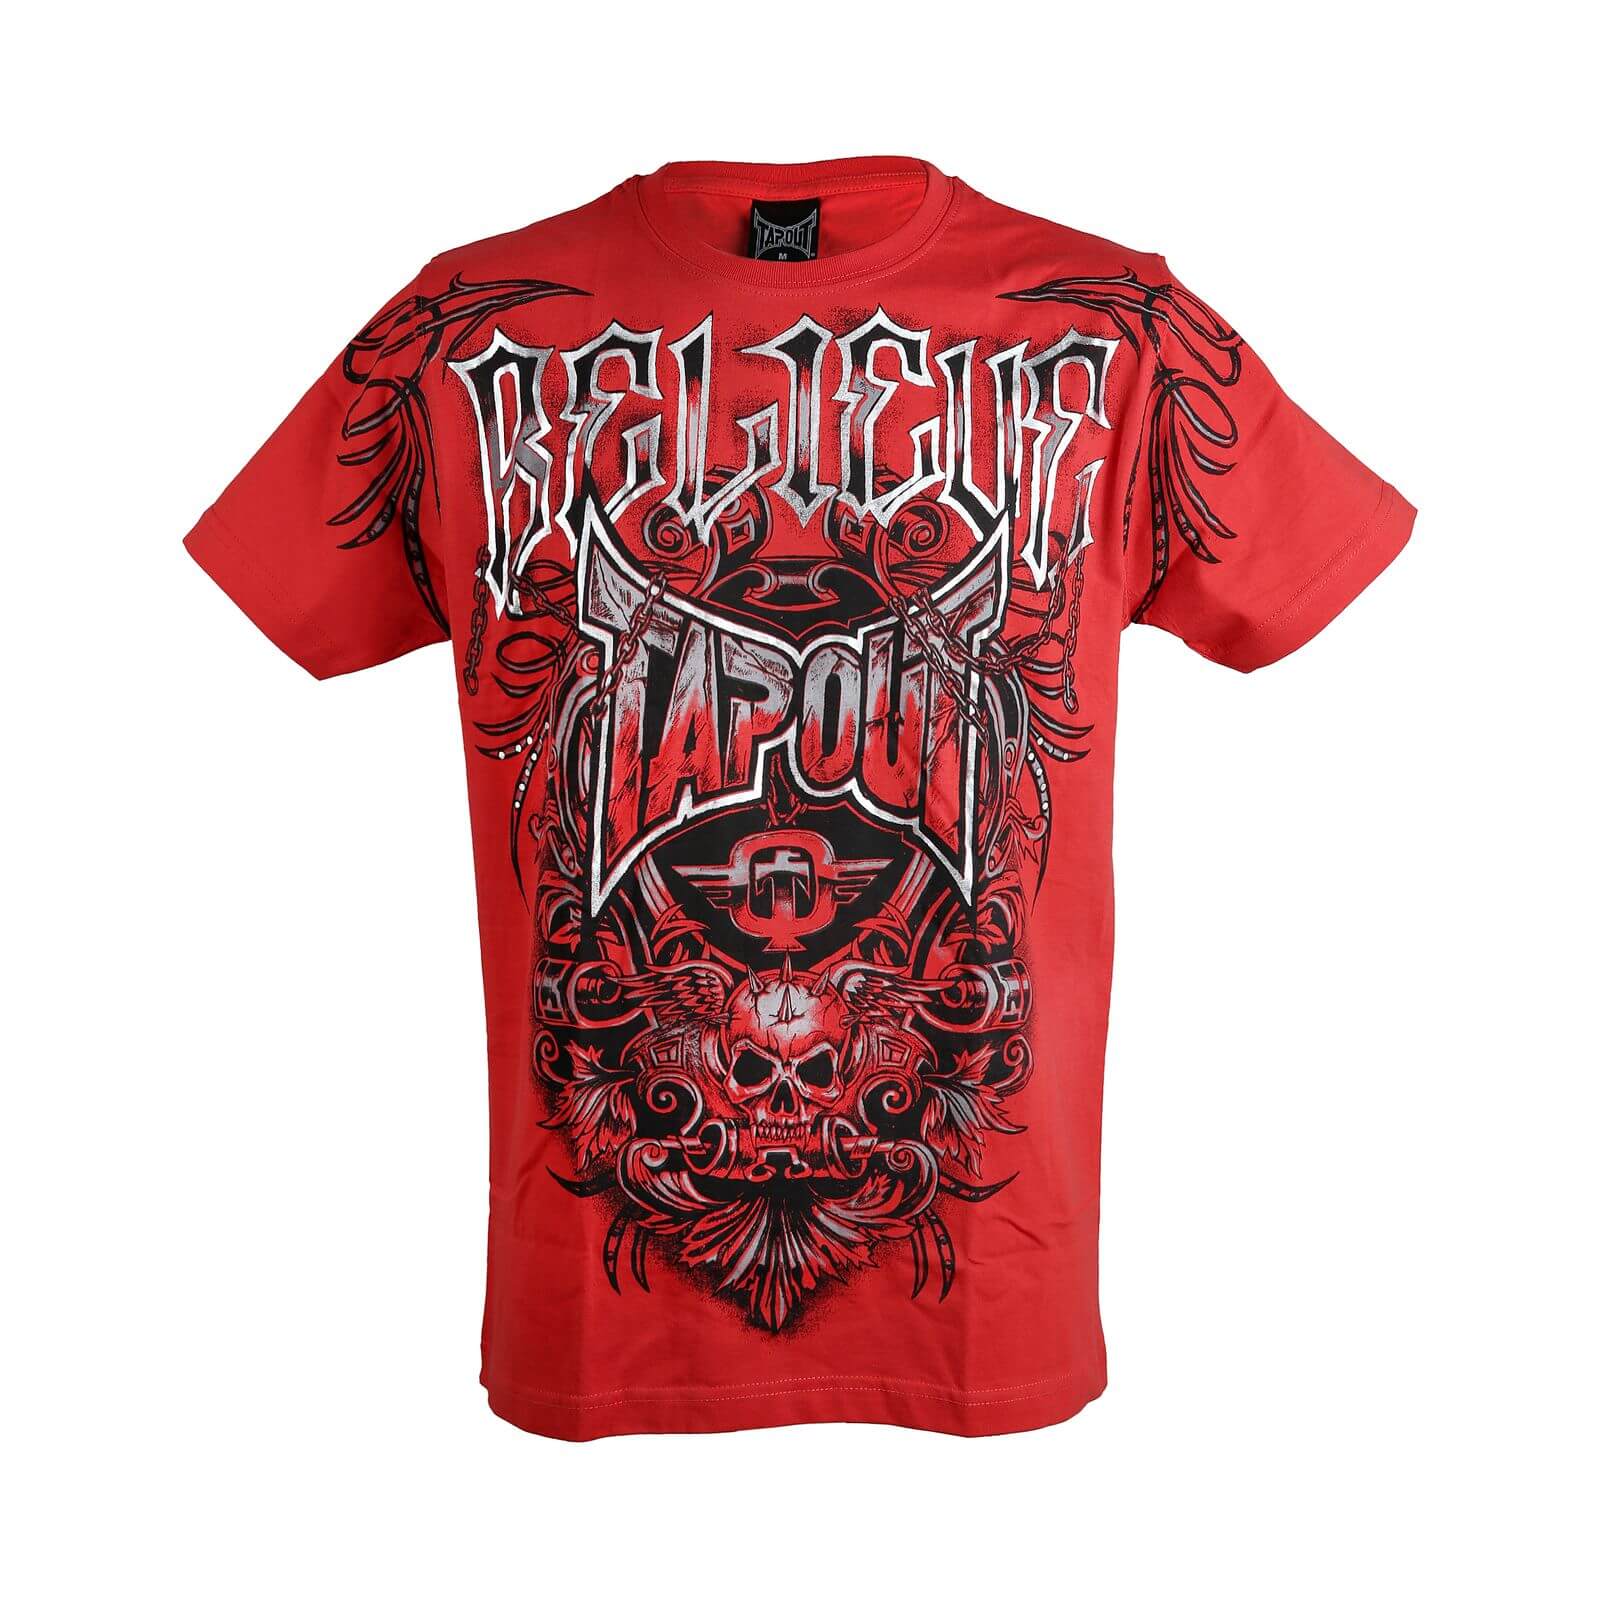 Agent Shield Tee, red, Tapout